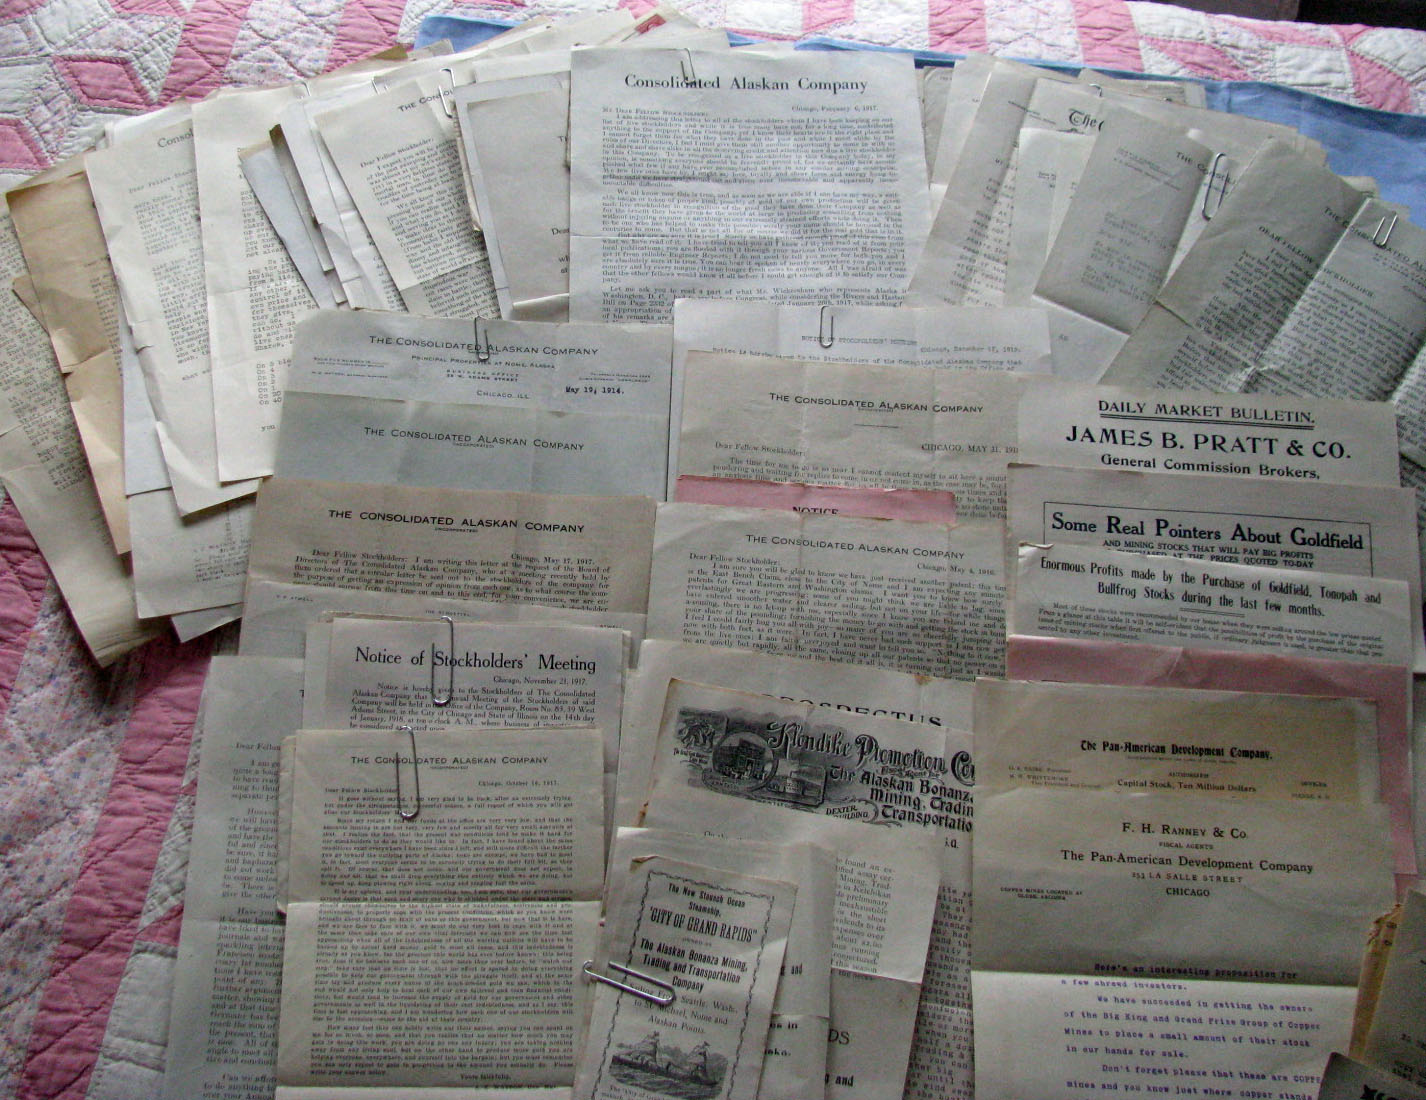 For sale: Alaska
              Bonanza Mining, Trading, and Transportation Company
              archive of documents, prospectuses, etc, from 1900 to
              about 1920, Nome Alaska.